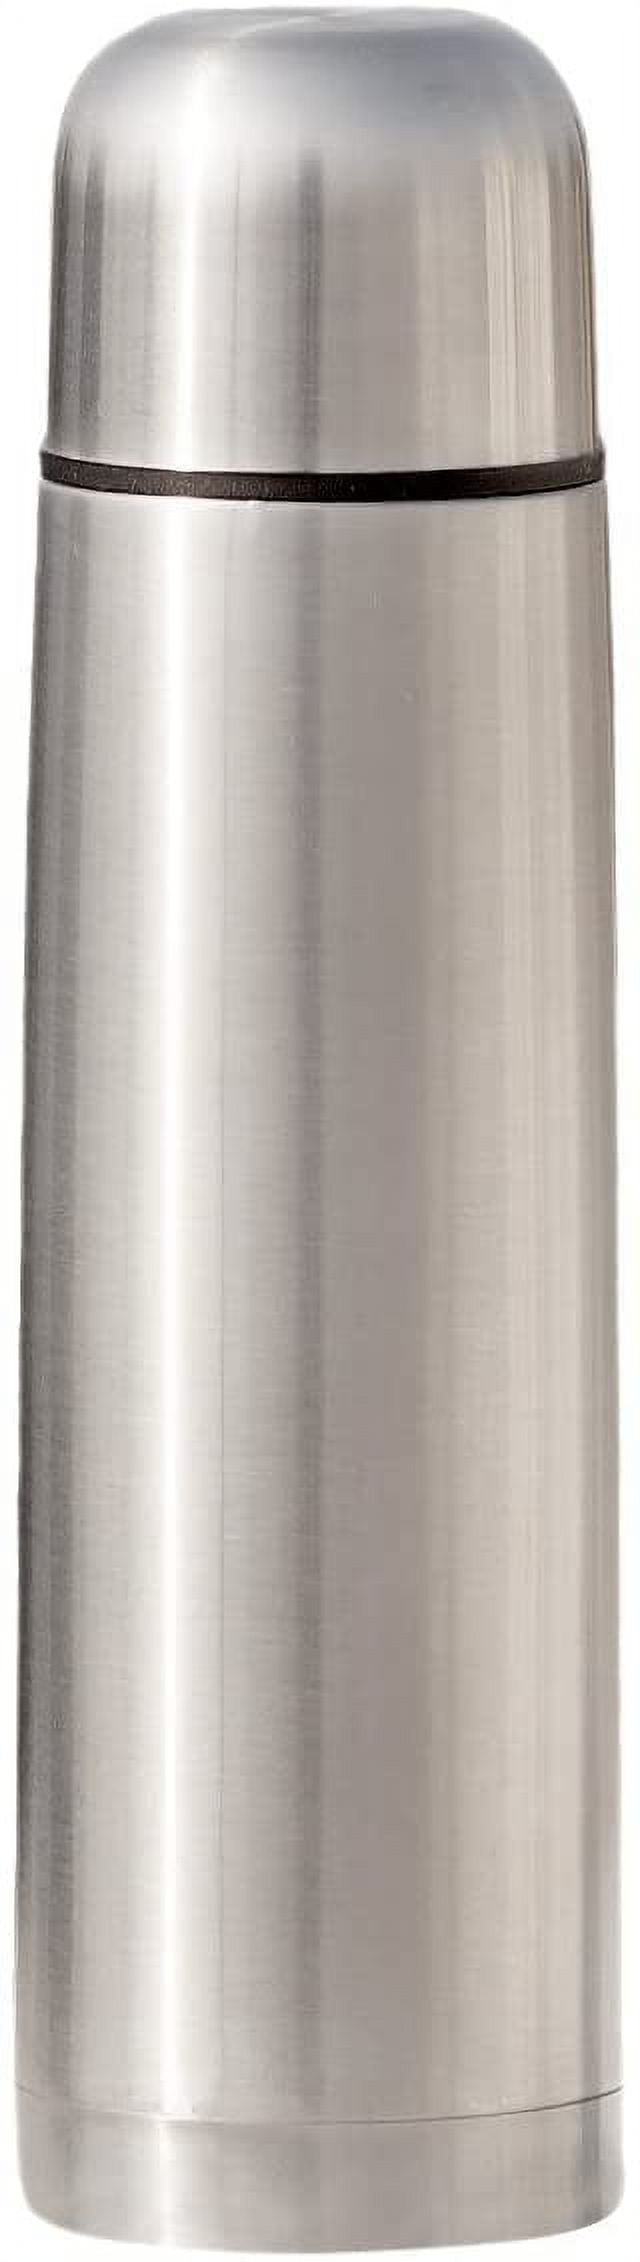 Best Stainless Steel Coffee Thermos, BPA Free, New Triple Wall Insulated,  Hot Water & Cold Drinks for Hours, Perfect for Biking, Backpack, Camping